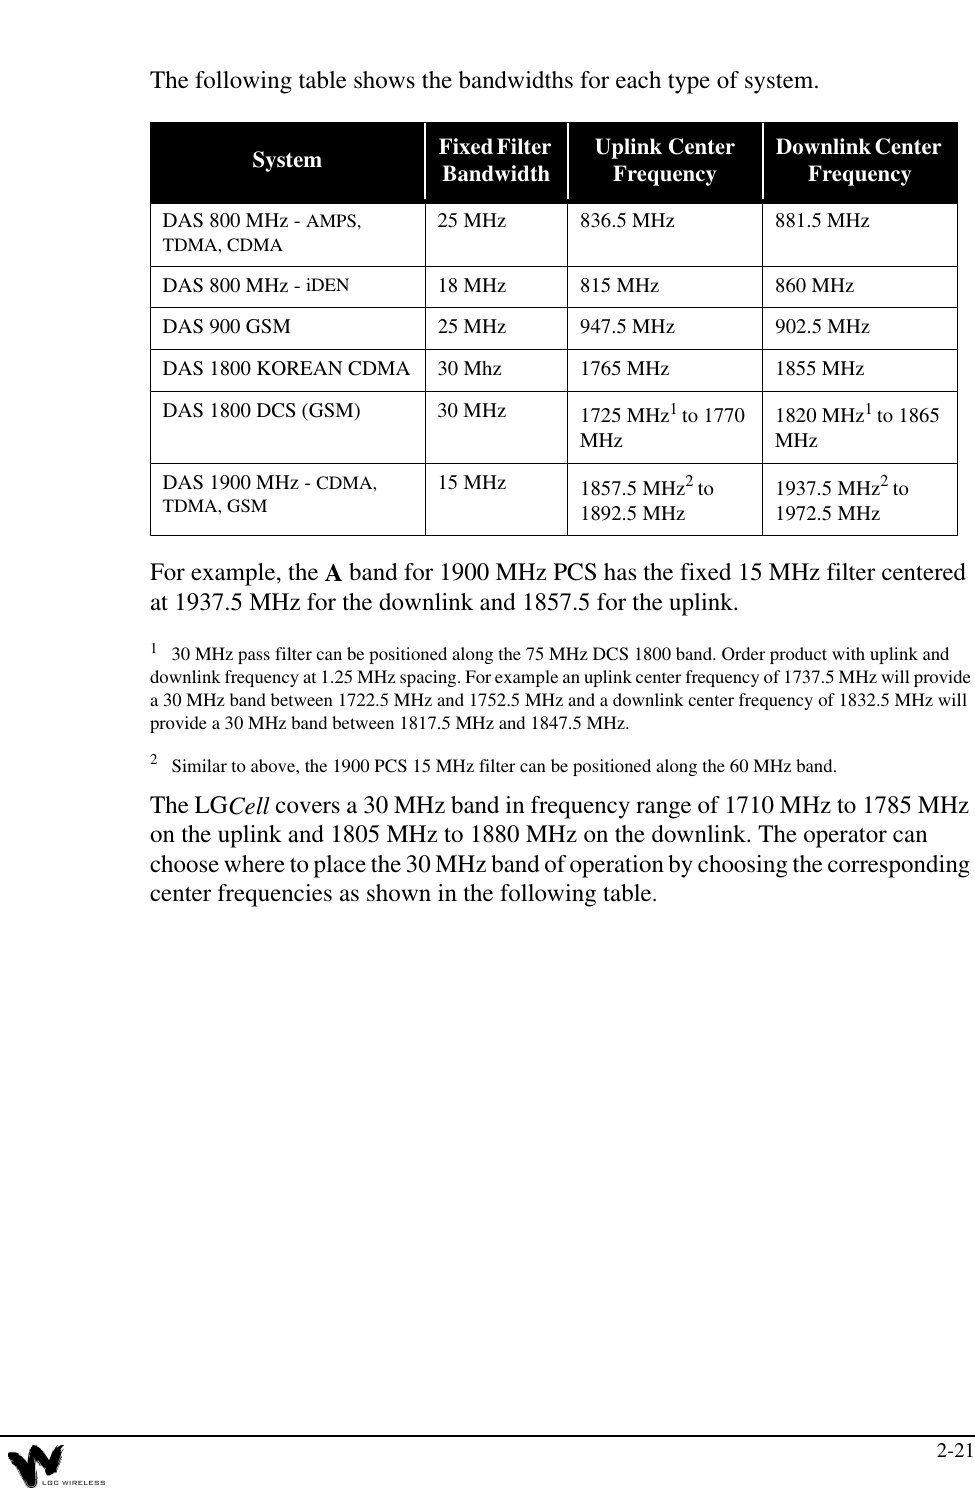 2-21The following table shows the bandwidths for each type of system.For example, the A band for 1900 MHz PCS has the fixed 15 MHz filter centered at 1937.5 MHz for the downlink and 1857.5 for the uplink.1   30 MHz pass filter can be positioned along the 75 MHz DCS 1800 band. Order product with uplink and downlink frequency at 1.25 MHz spacing. For example an uplink center frequency of 1737.5 MHz will provide a 30 MHz band between 1722.5 MHz and 1752.5 MHz and a downlink center frequency of 1832.5 MHz will provide a 30 MHz band between 1817.5 MHz and 1847.5 MHz.2   Similar to above, the 1900 PCS 15 MHz filter can be positioned along the 60 MHz band.The LGCell covers a 30 MHz band in frequency range of 1710 MHz to 1785 MHz on the uplink and 1805 MHz to 1880 MHz on the downlink. The operator can choose where to place the 30 MHz band of operation by choosing the corresponding center frequencies as shown in the following table.System Fixed Filter Bandwidth Uplink Center Frequency Downlink Center FrequencyDAS 800 MHz - AMPS, TDMA, CDMA25 MHz 836.5 MHz 881.5 MHzDAS 800 MHz - iDEN 18 MHz 815 MHz 860 MHzDAS 900 GSM 25 MHz 947.5 MHz 902.5 MHzDAS 1800 KOREAN CDMA 30 Mhz 1765 MHz 1855 MHzDAS 1800 DCS (GSM) 30 MHz 1725 MHz1 to 1770 MHz 1820 MHz1 to 1865 MHzDAS 1900 MHz - CDMA, TDMA, GSM15 MHz 1857.5 MHz2 to 1892.5 MHz 1937.5 MHz2 to 1972.5 MHz